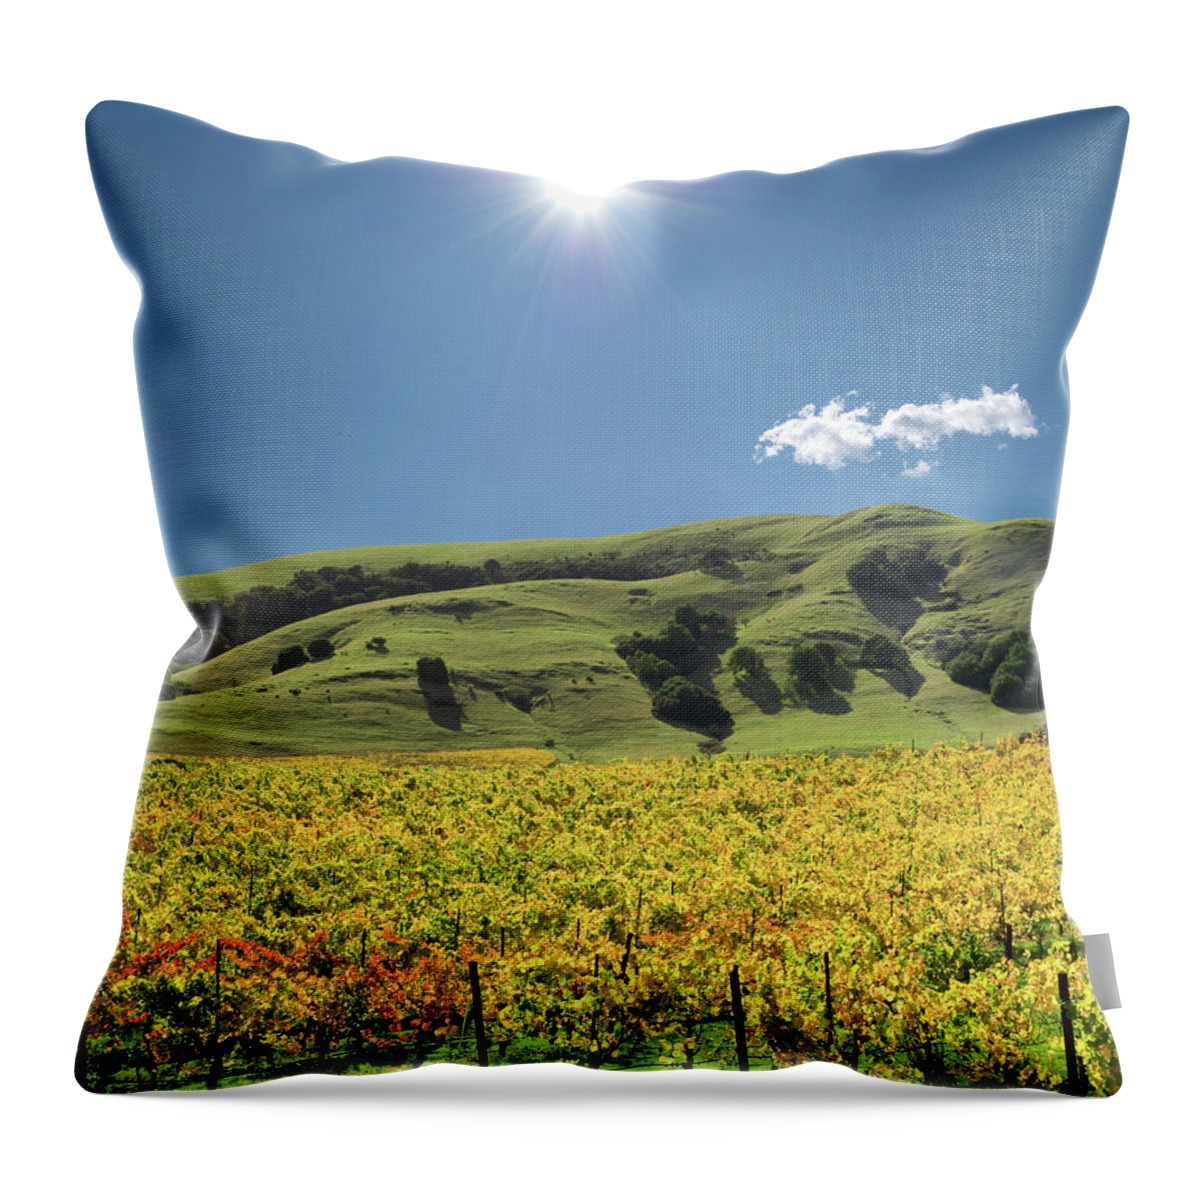 Scenics Throw Pillow featuring the photograph Sonoma Valley Winery Vines by Ivanastar